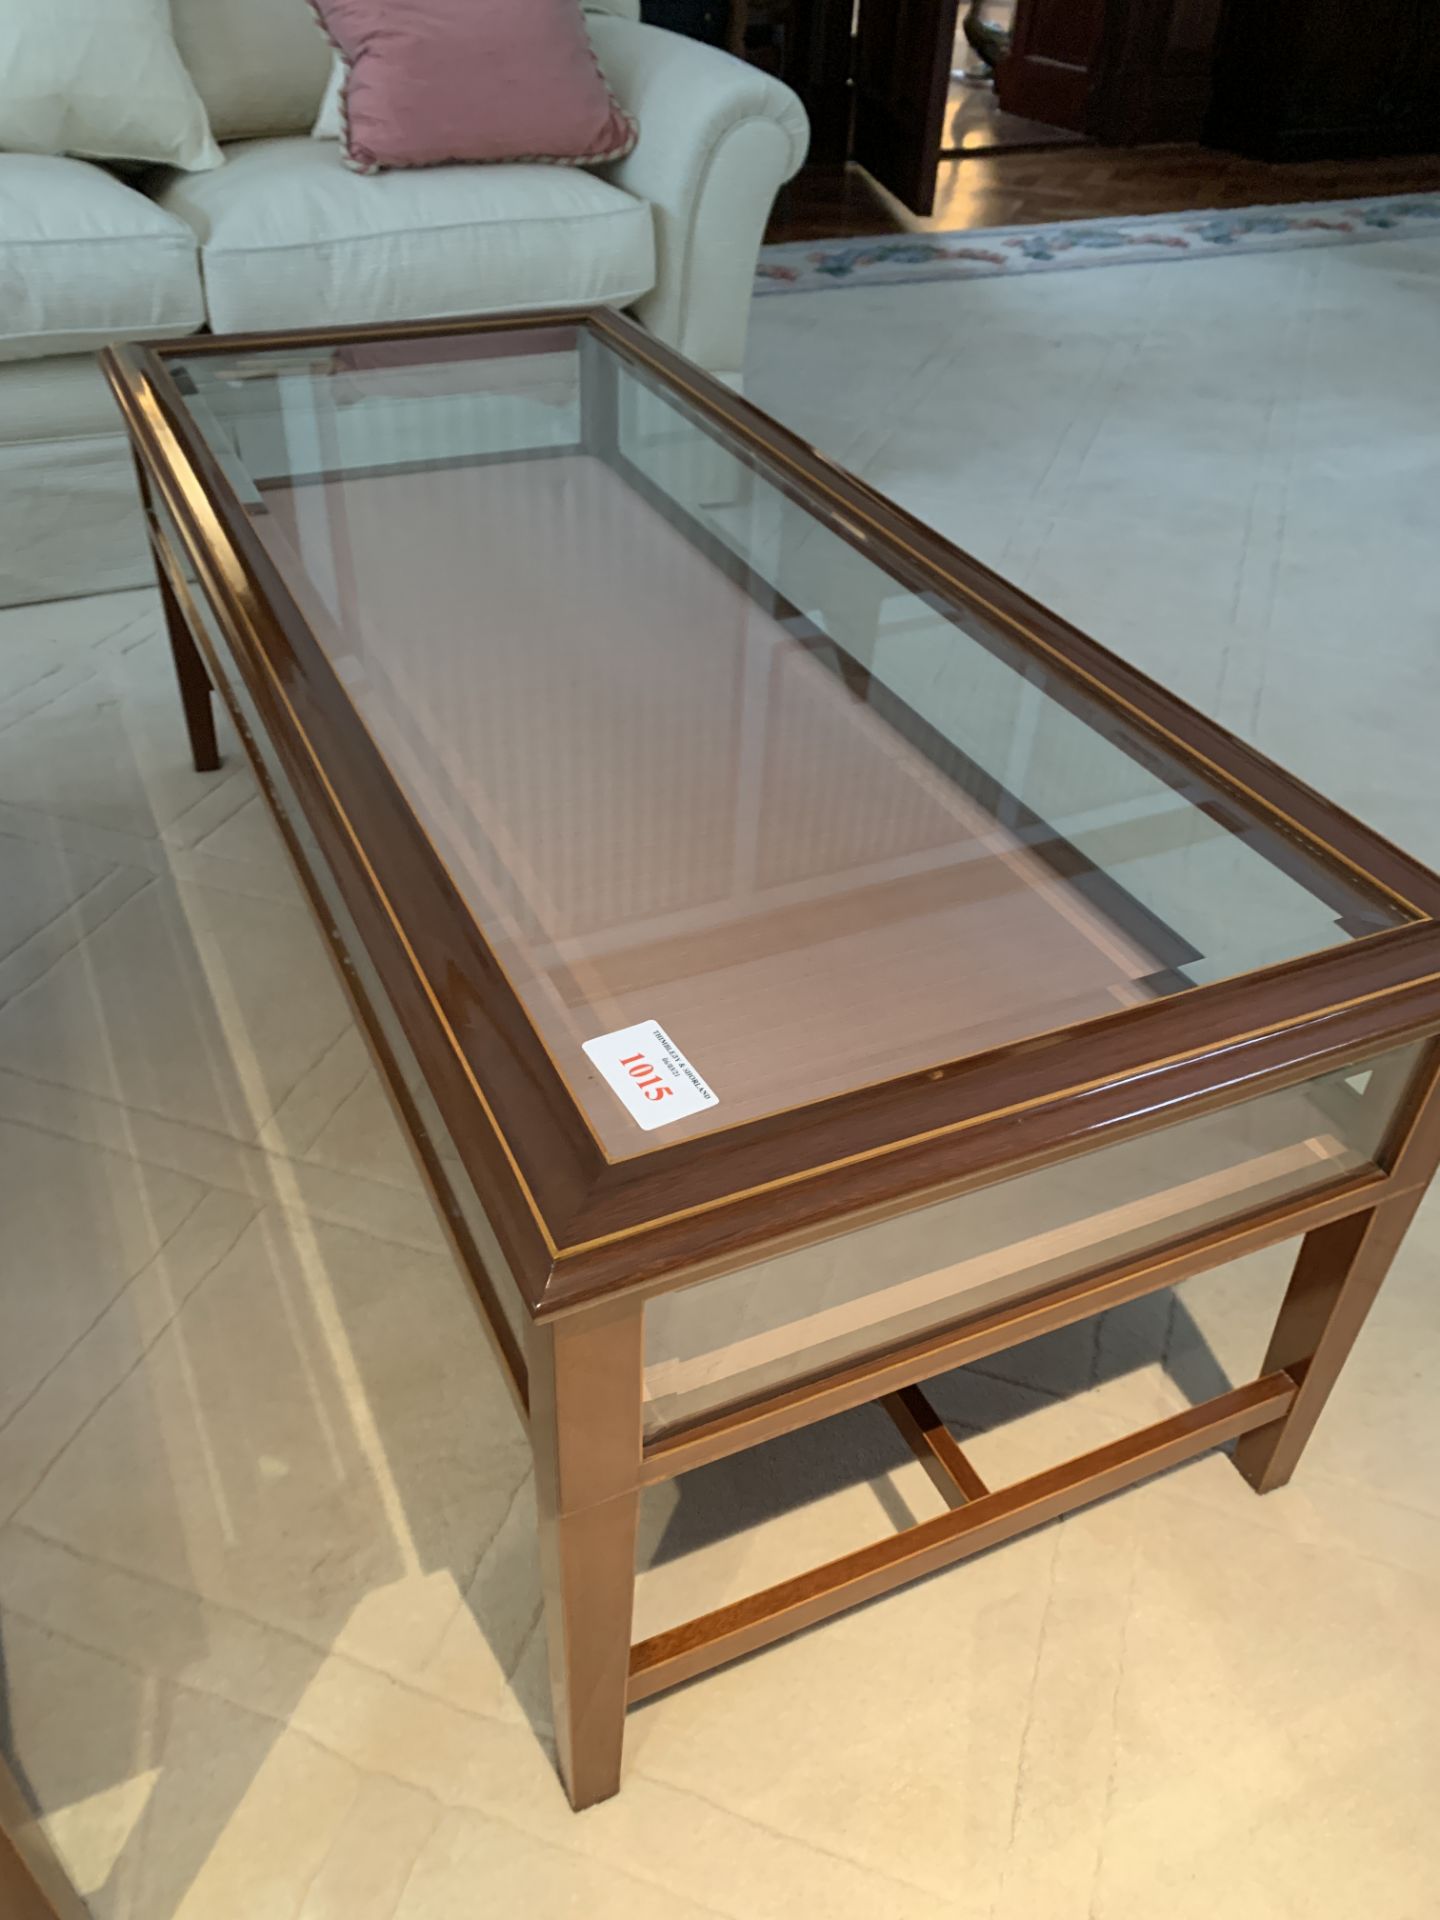 Rectangular display/coffee table with bevelled edge glass and rising lid